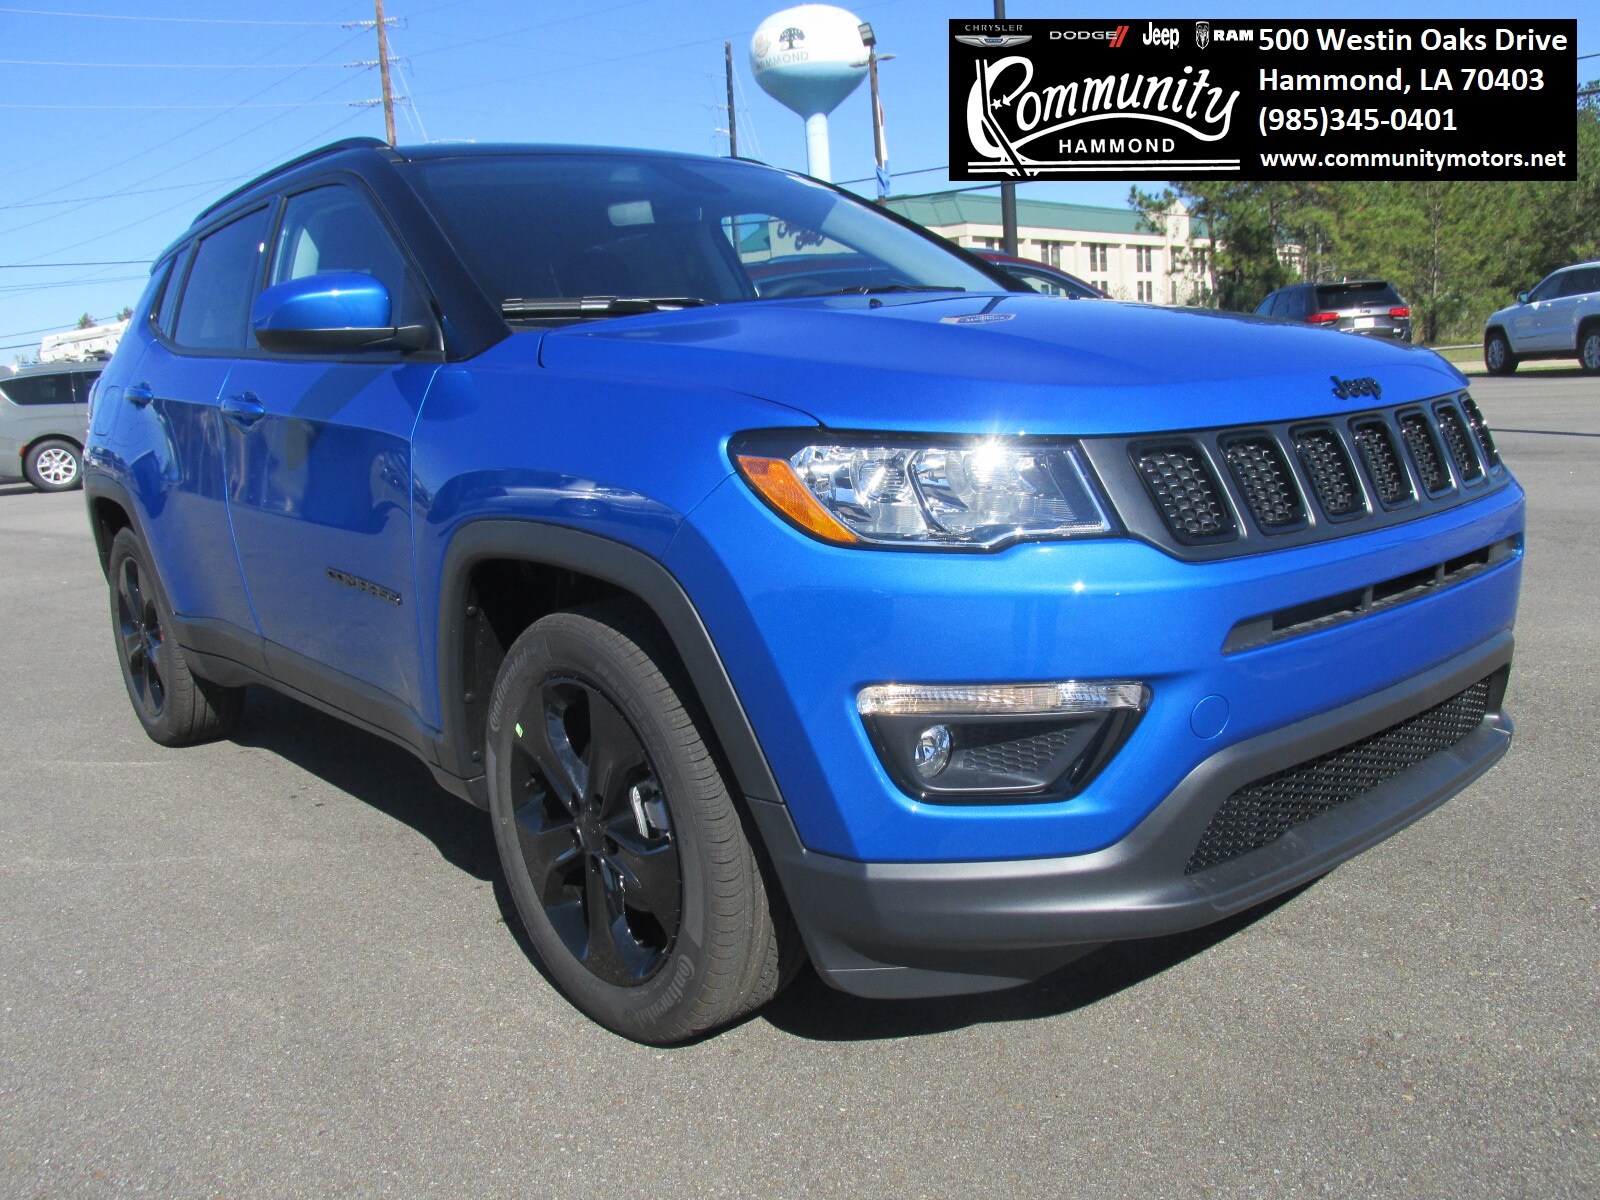 21 Jeep Compass Altitude Fwd For Sale In Hammond La And Serving Baton Rouge Stock